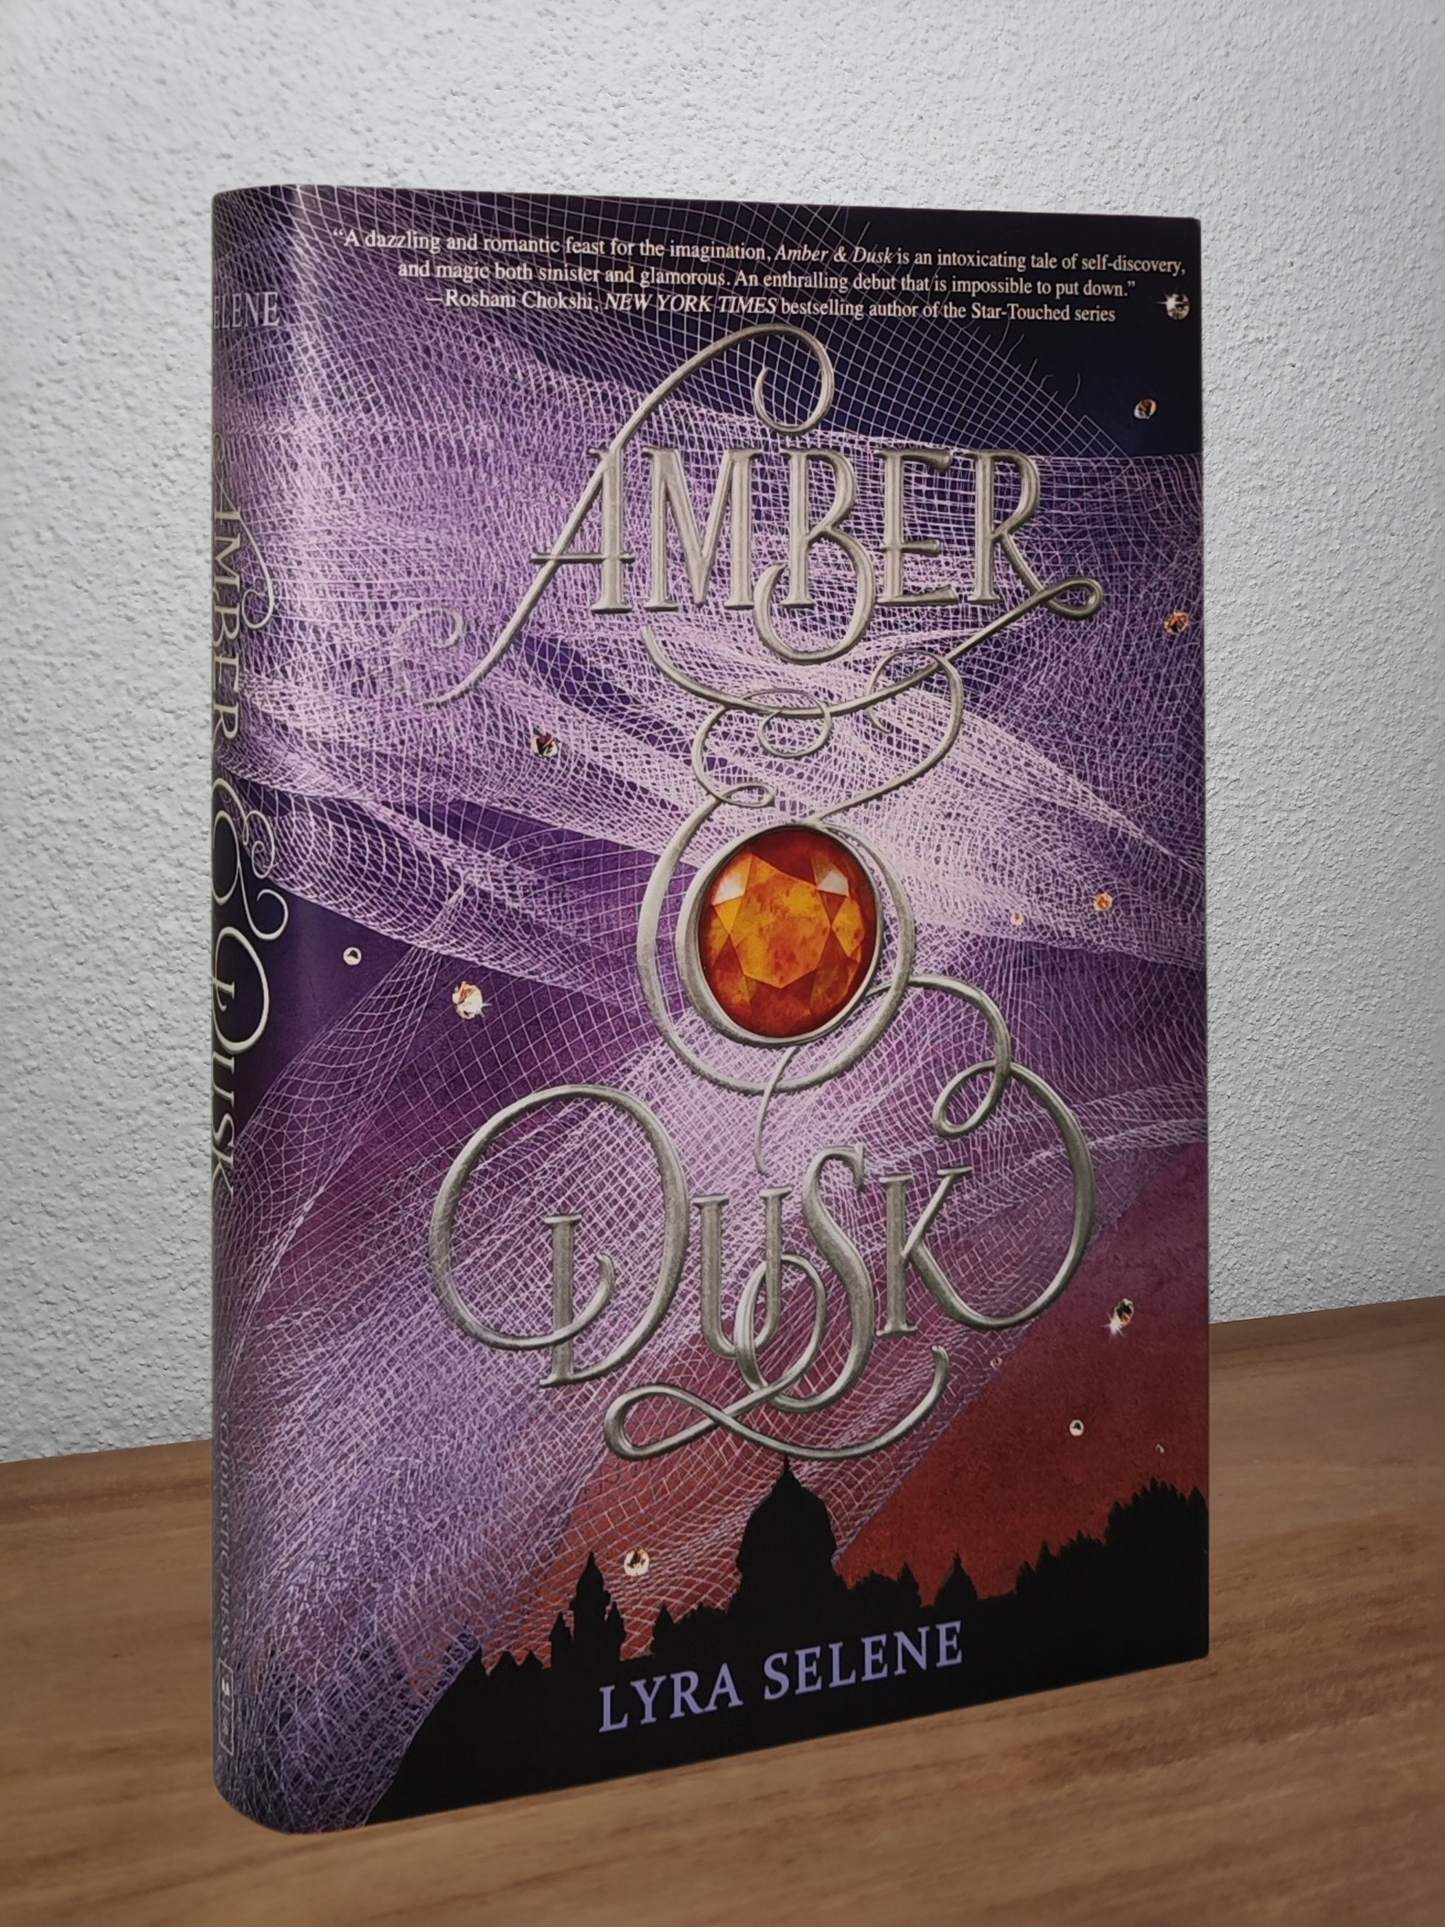 Lyra Selene - Amber Dusk  - Second-hand english book to deliver in Zurich & Switzerland